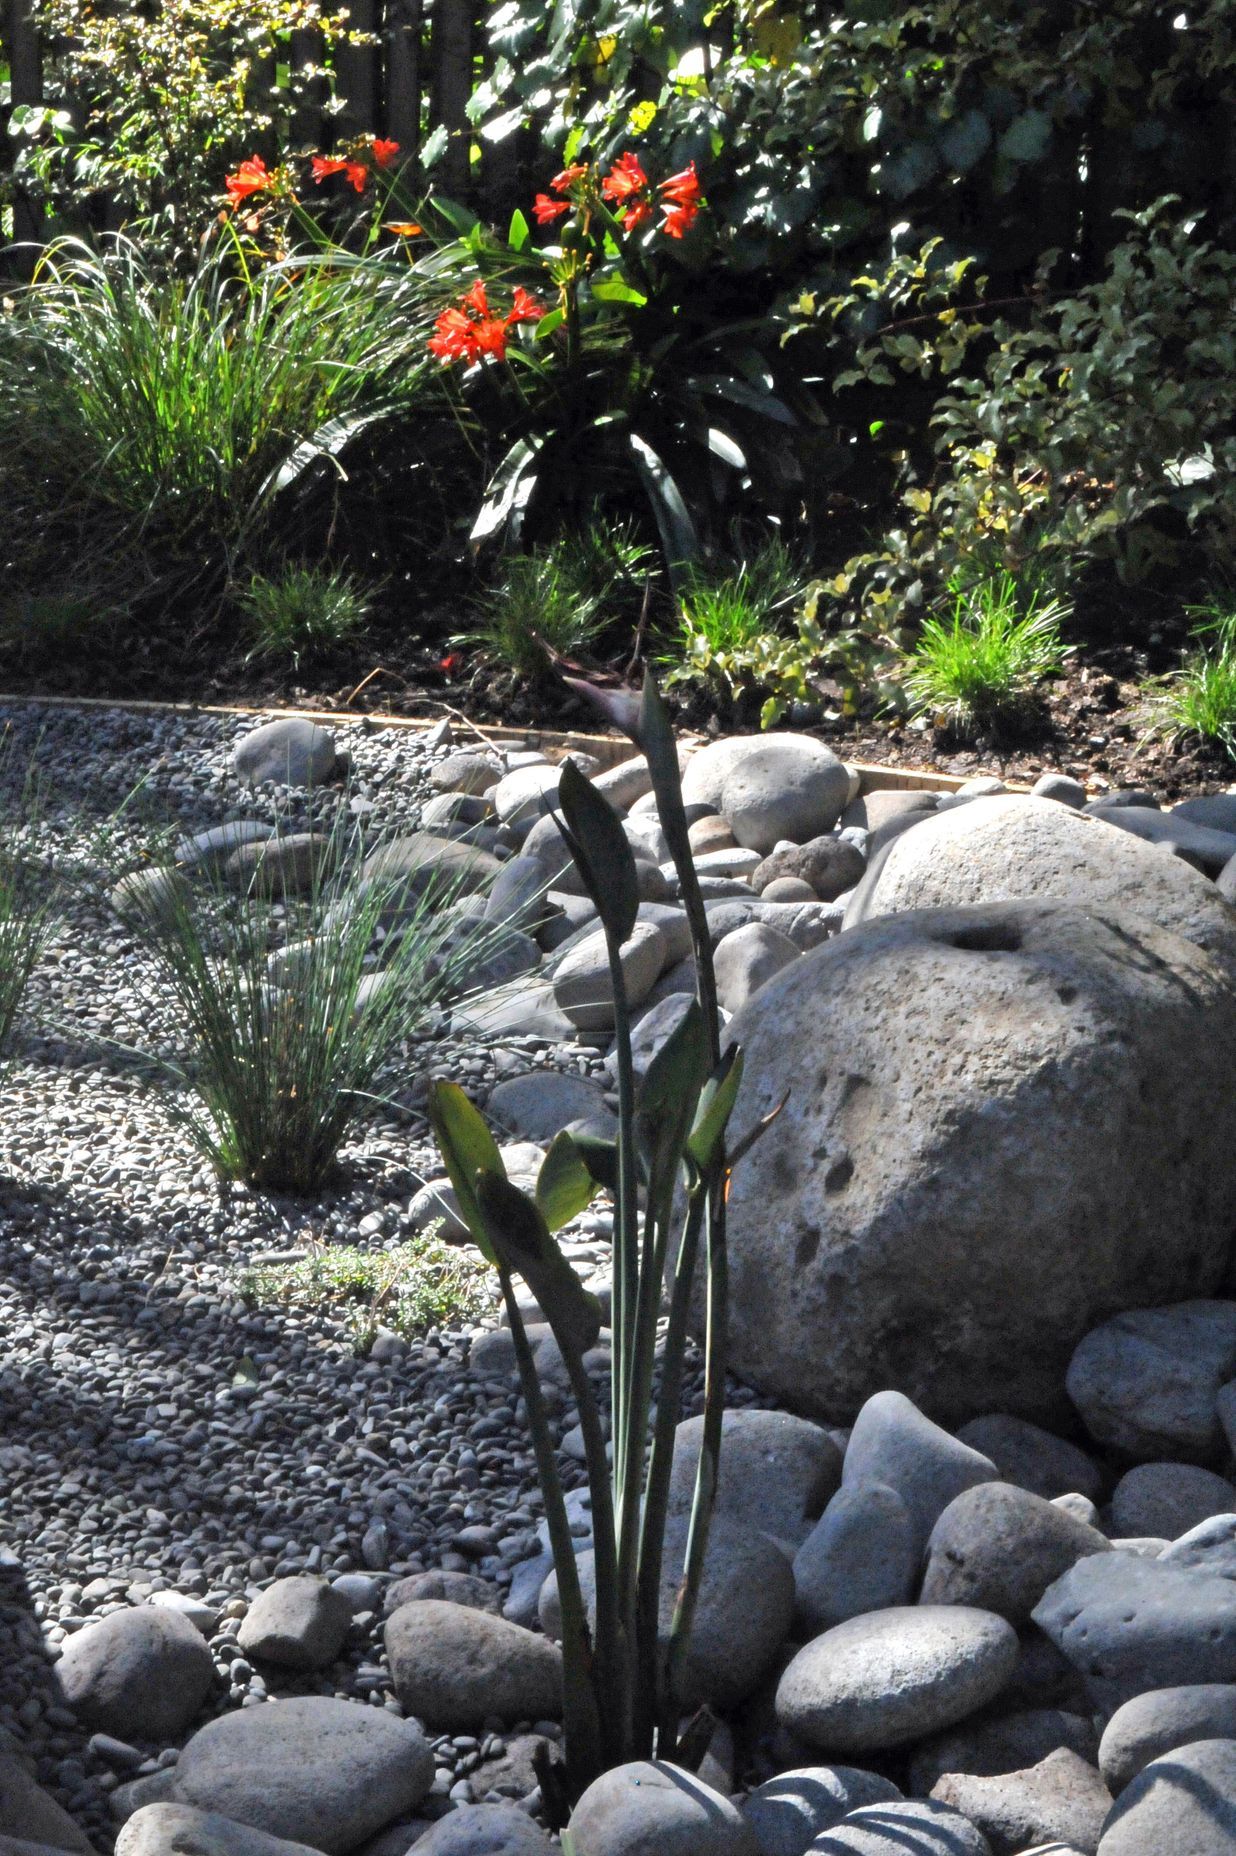 A rain garden was created to help detain and retain stormwater on site. It was surfaced with carefully graded boulders and pebbles.